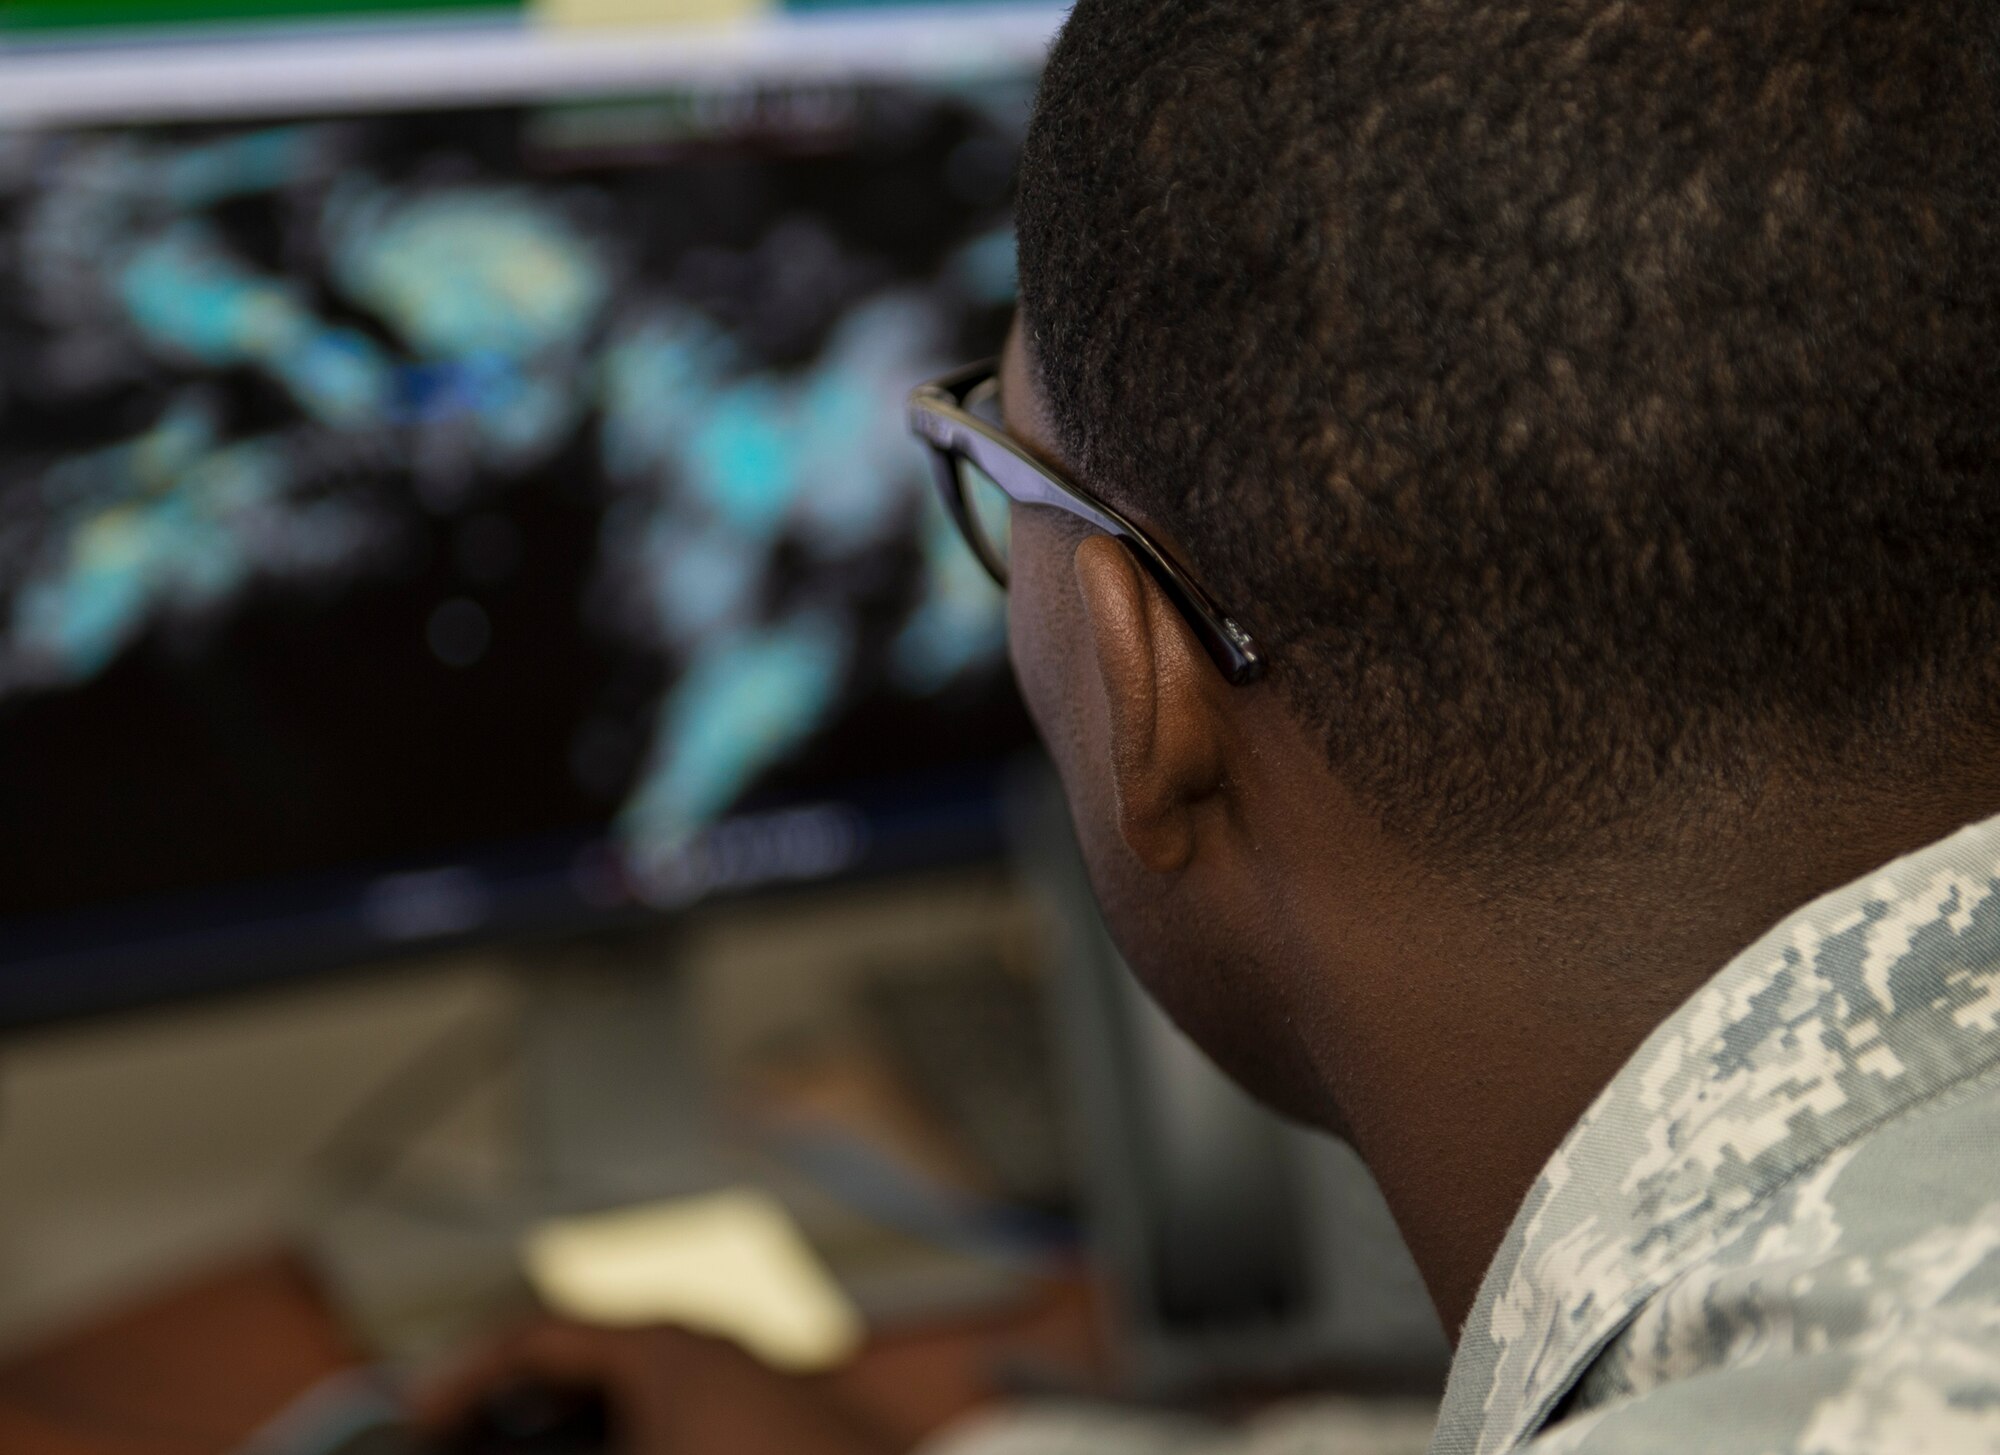 U.S. Air Force Master Sgt. Deerick Gray, flight chief with the 379th Expeditionary Operations Support Squadron, Operations Weather Flight reviews radar imagery for the U.S. Central Command area of responsibility at Al Udeid Air Base, Qatar, May 1, 2017. Gray is utilizing the latest information to predict weather patterns, prepare forecasts and communicate weather information to commanders and pilots so their mission goes as planned. (U.S. Air Force photo by Tech. Sgt. Amy M. Lovgren)